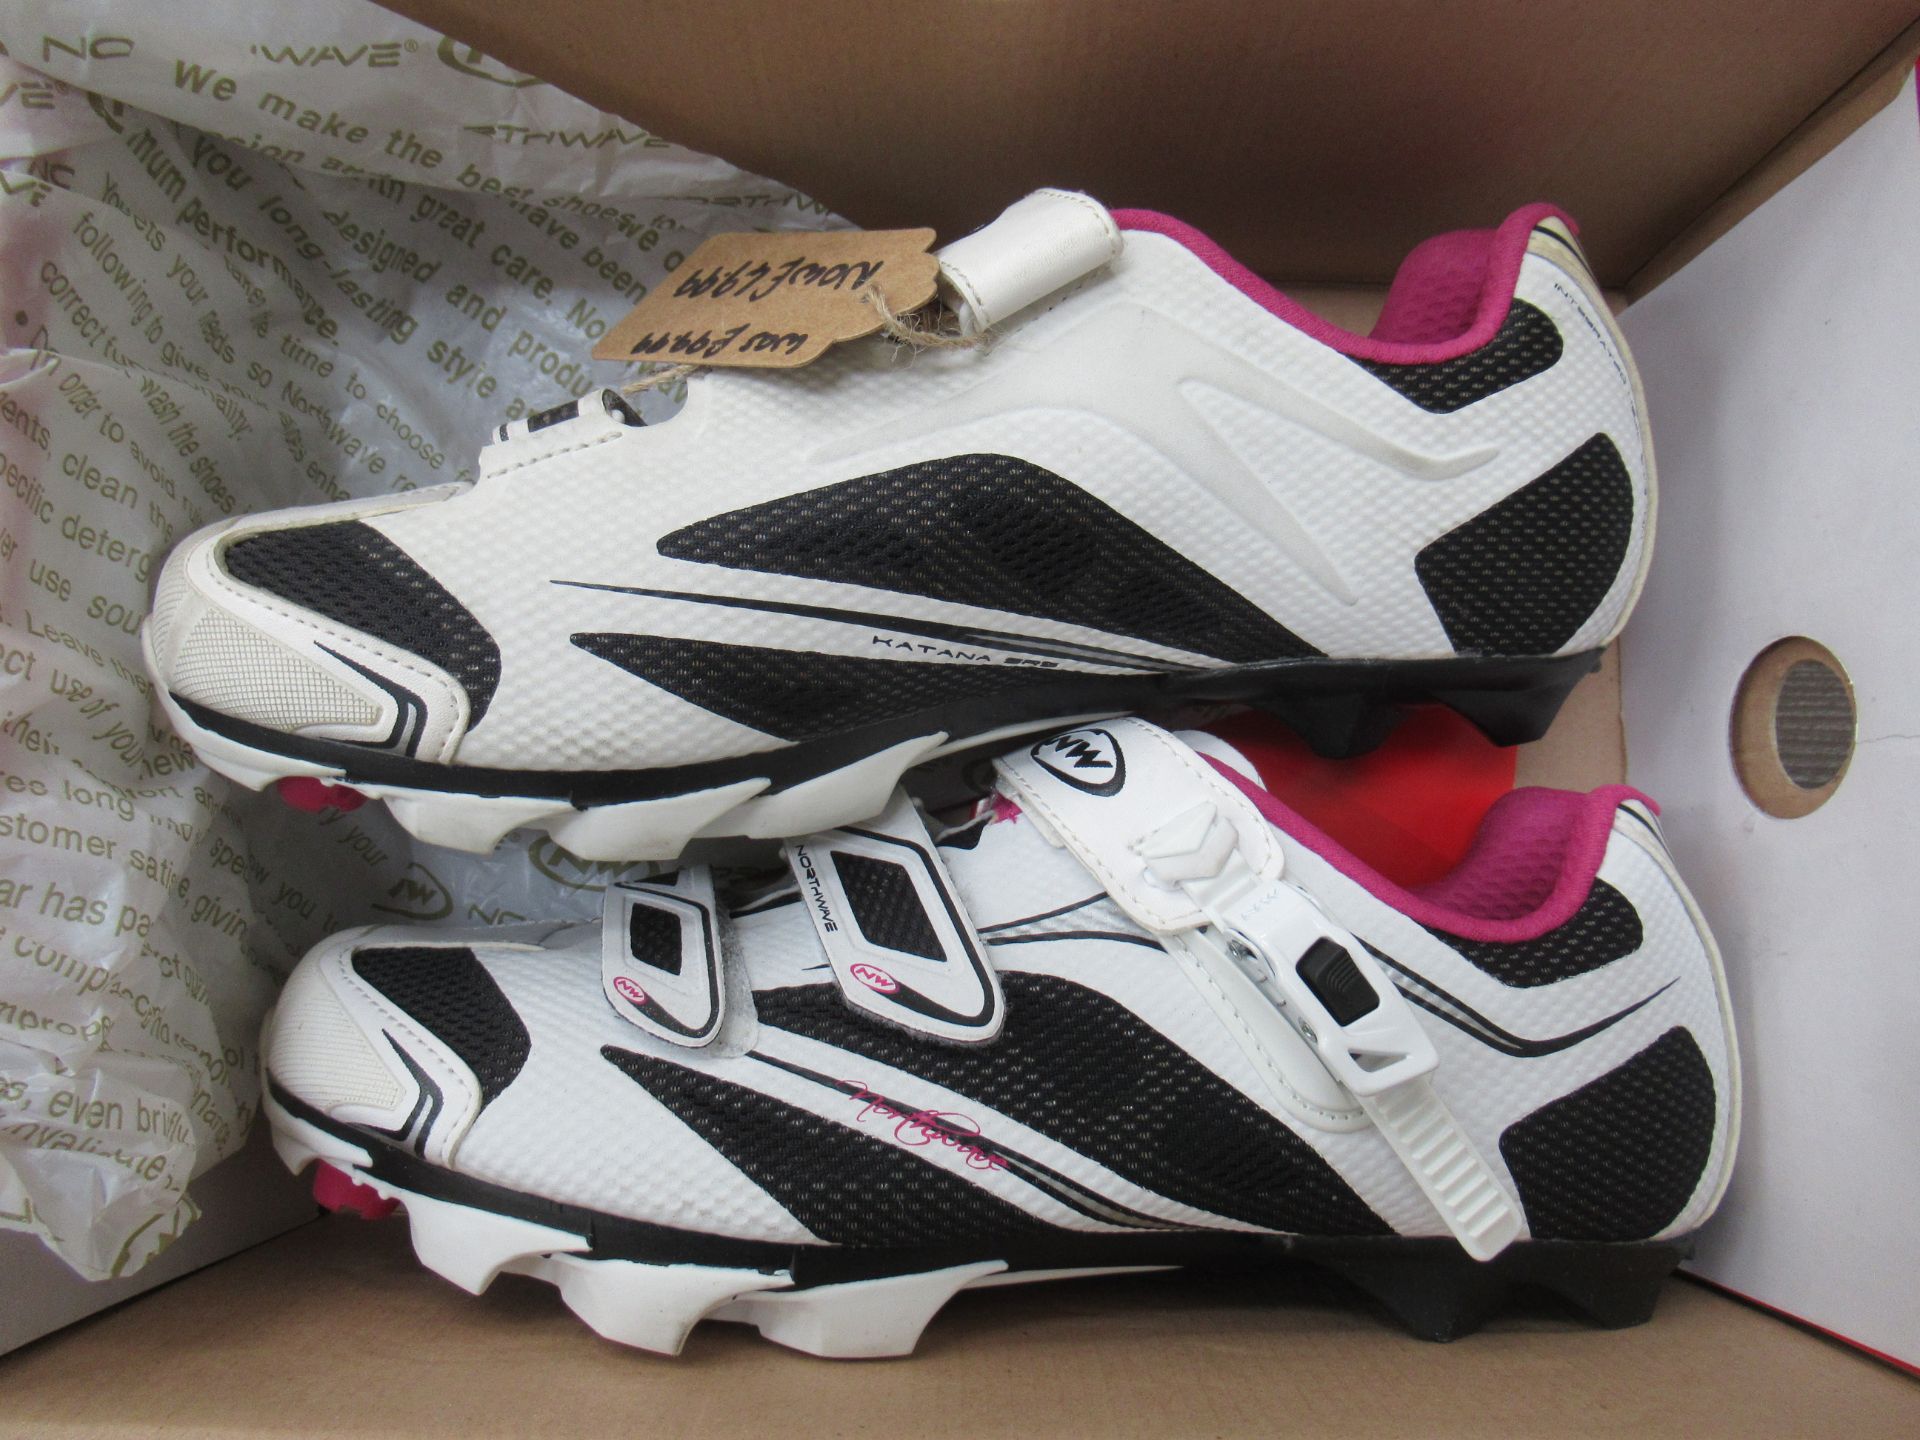 2 x Pairs of cycling shoes: 1 x Northwave Katana SRS boxed EU size 42 (RRP£99.99) and 1 x FLR F-35 I - Image 3 of 7